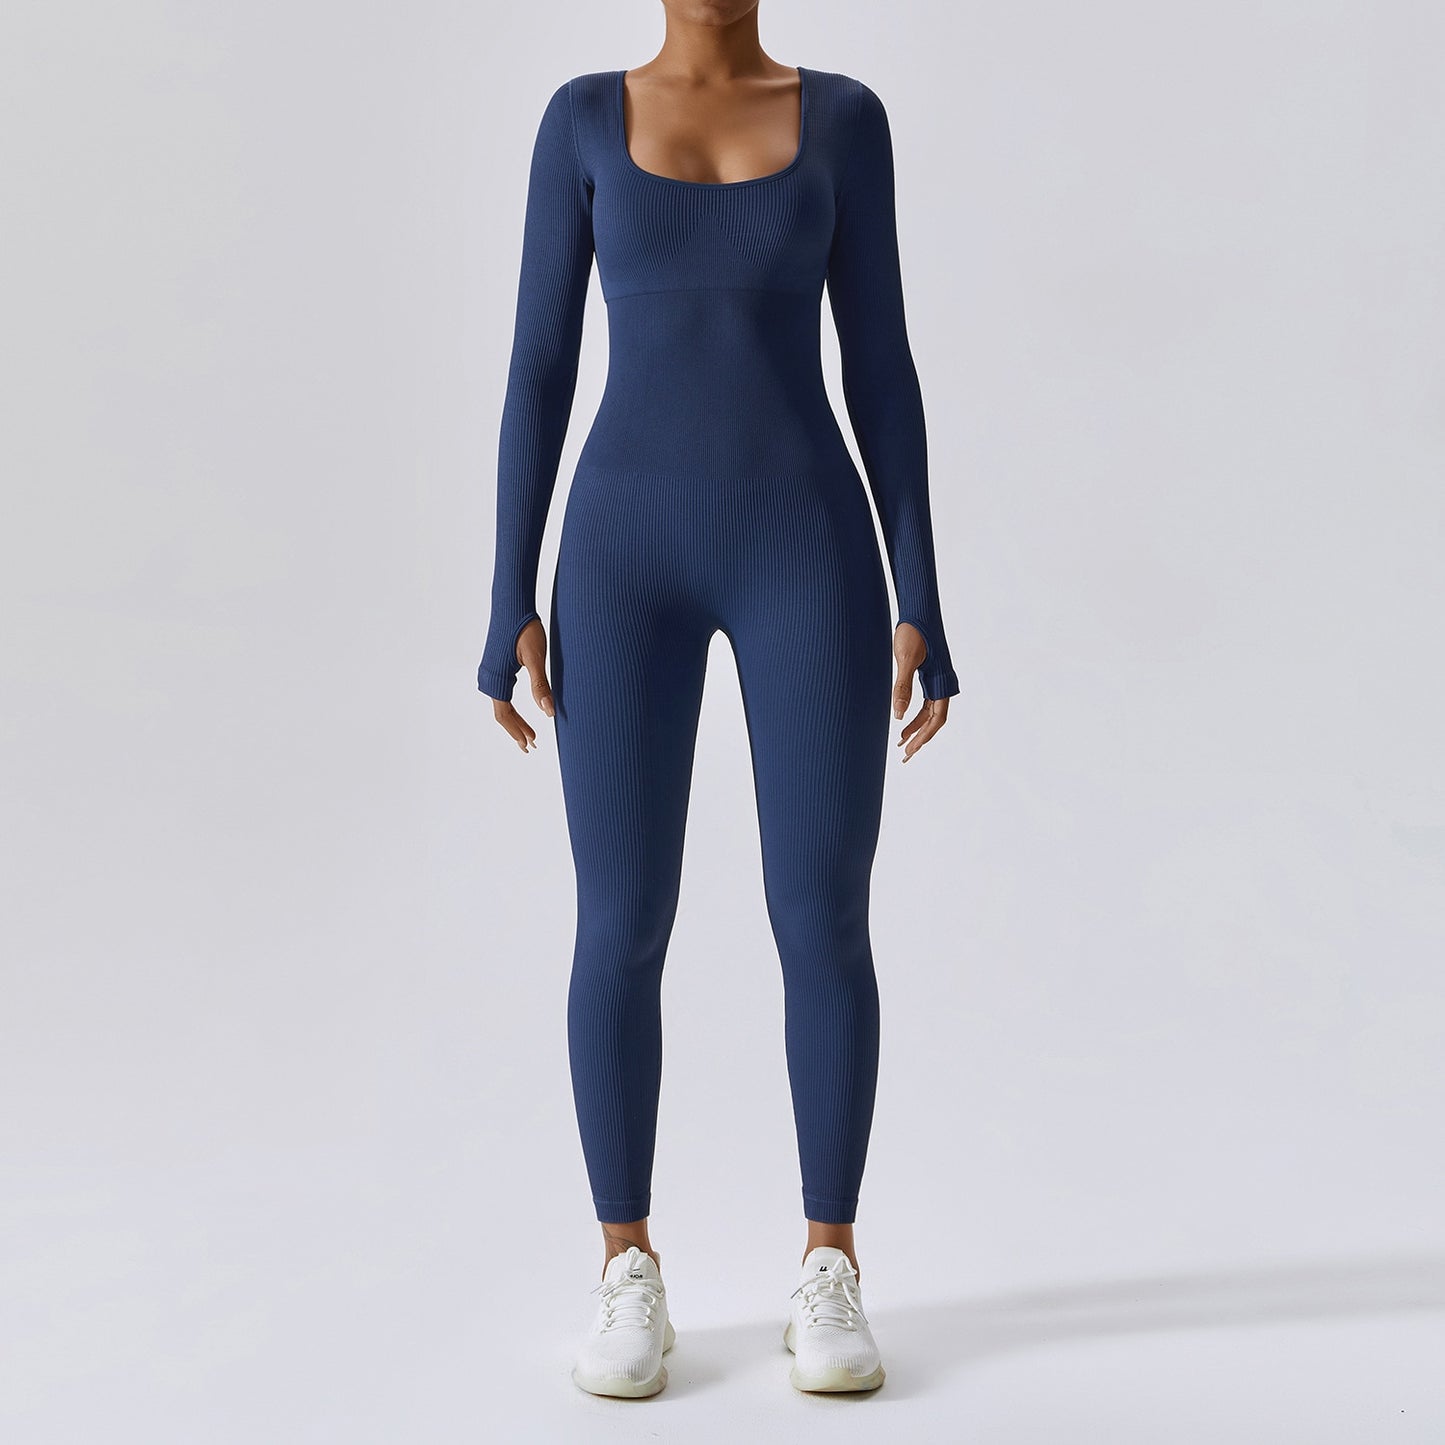 Seamless Yoga Suit Women's Bodysuit Spring Dance Fitness Clothes Gym Push Up Workout Bodysuit Tight Long-Sleeved Athletic Wear - Bonnie Lassio